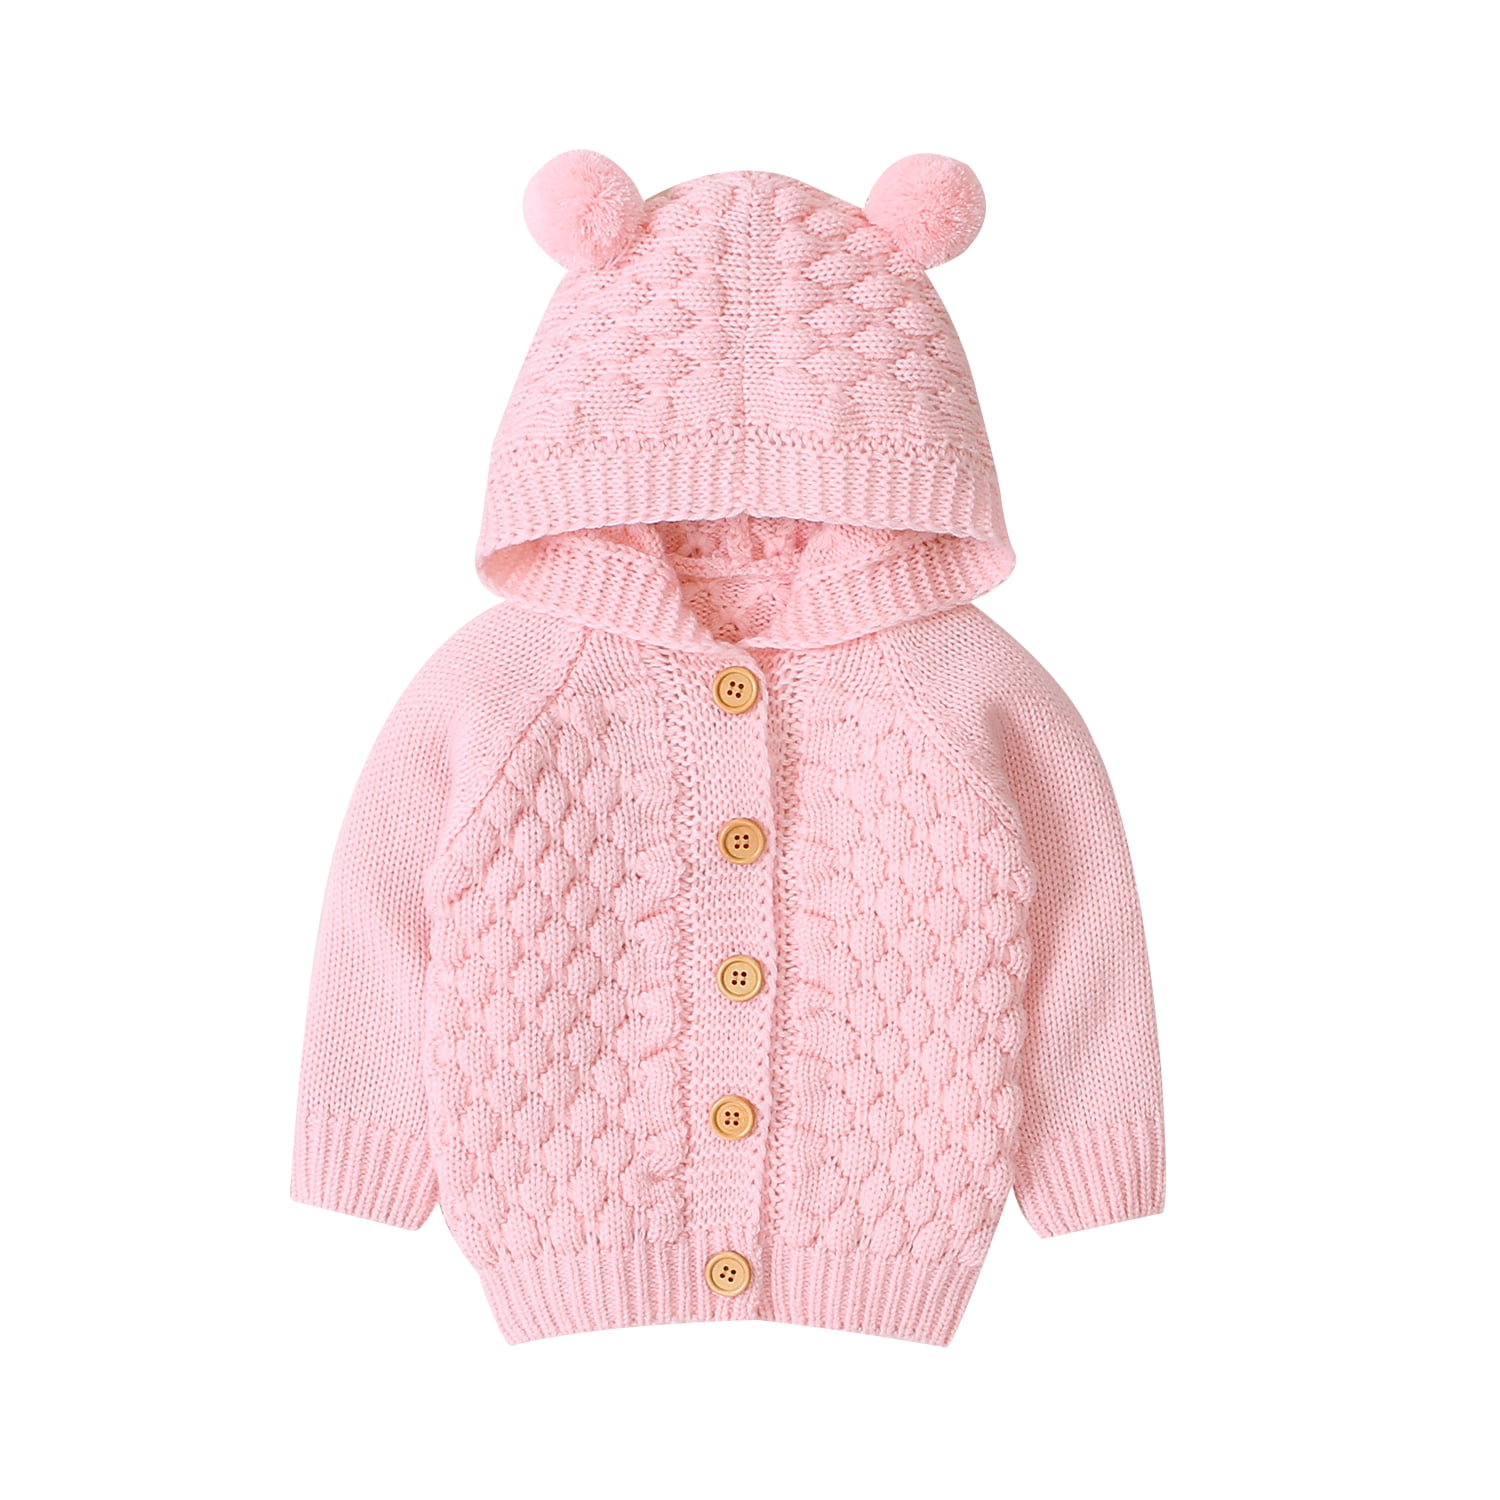 Toddler Infant Baby Girl Boy Fall Winter Cable Solid Color Knitted Hood Cardigans Jacket Outwear with Ears 